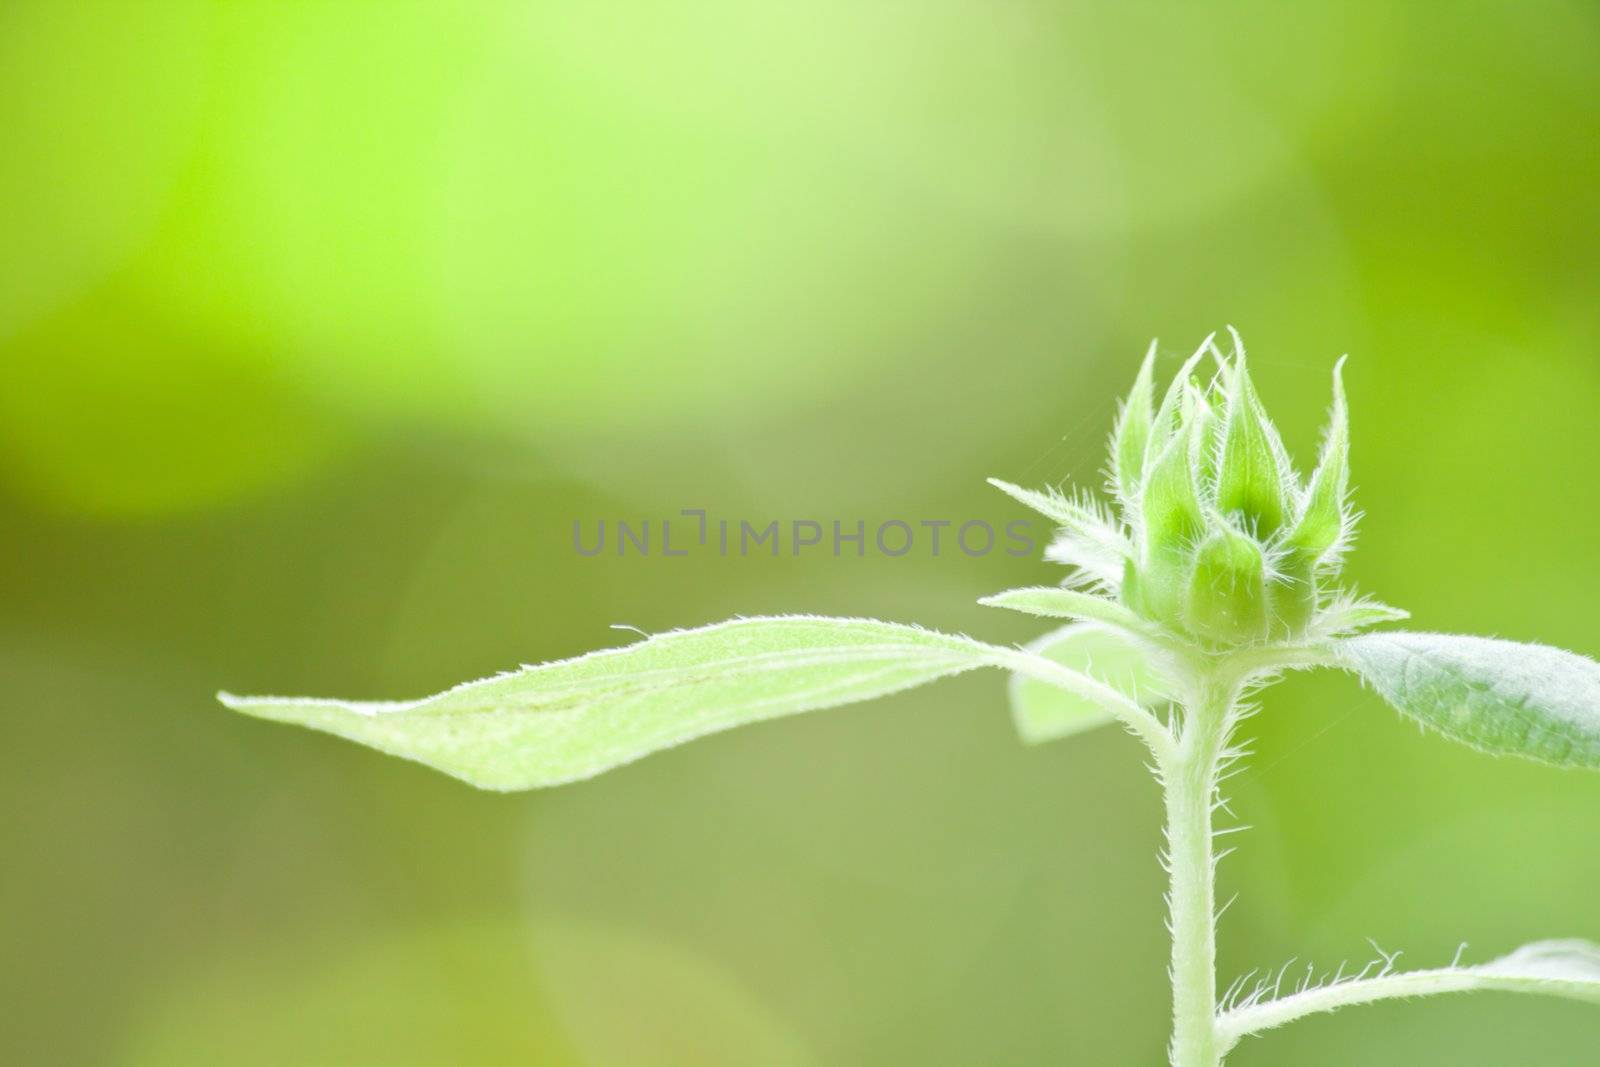 Green blossom by artemisphoto